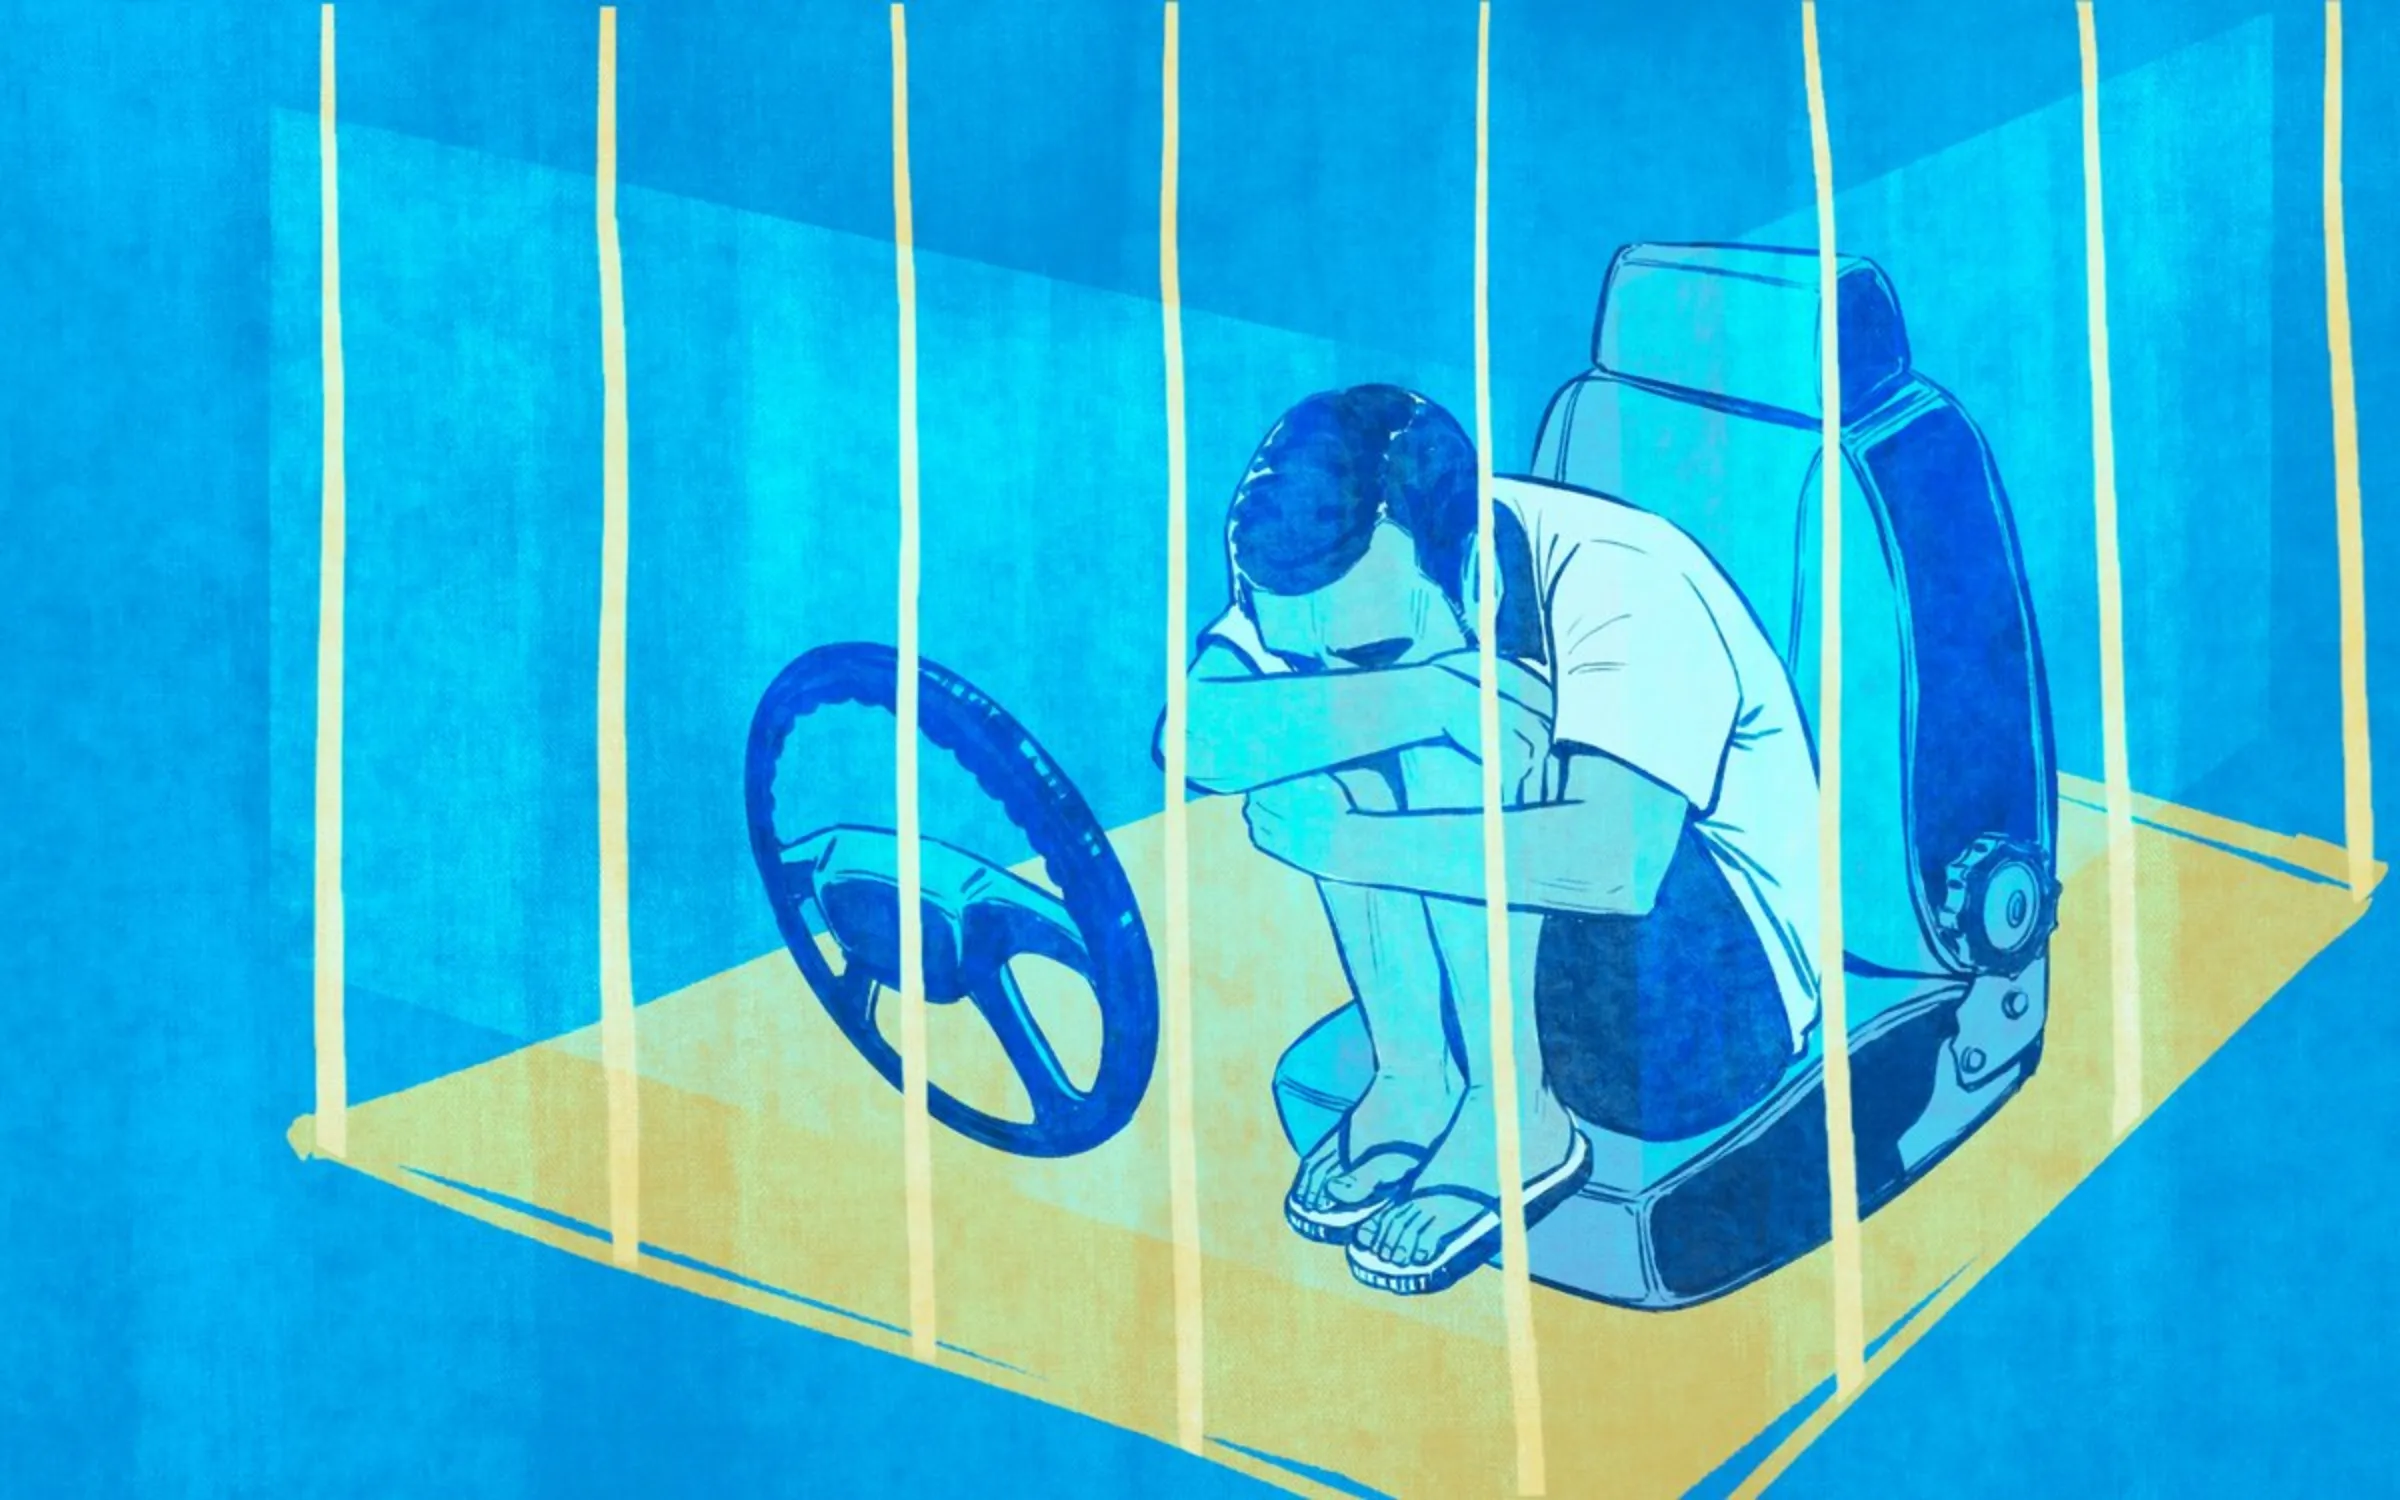 An illustration in blue and yellow shows a man hugging his knees to his chest, head down, in a car seat contained behind bars. A steering wheel lies against the bars. Thomson Reuters Foundation